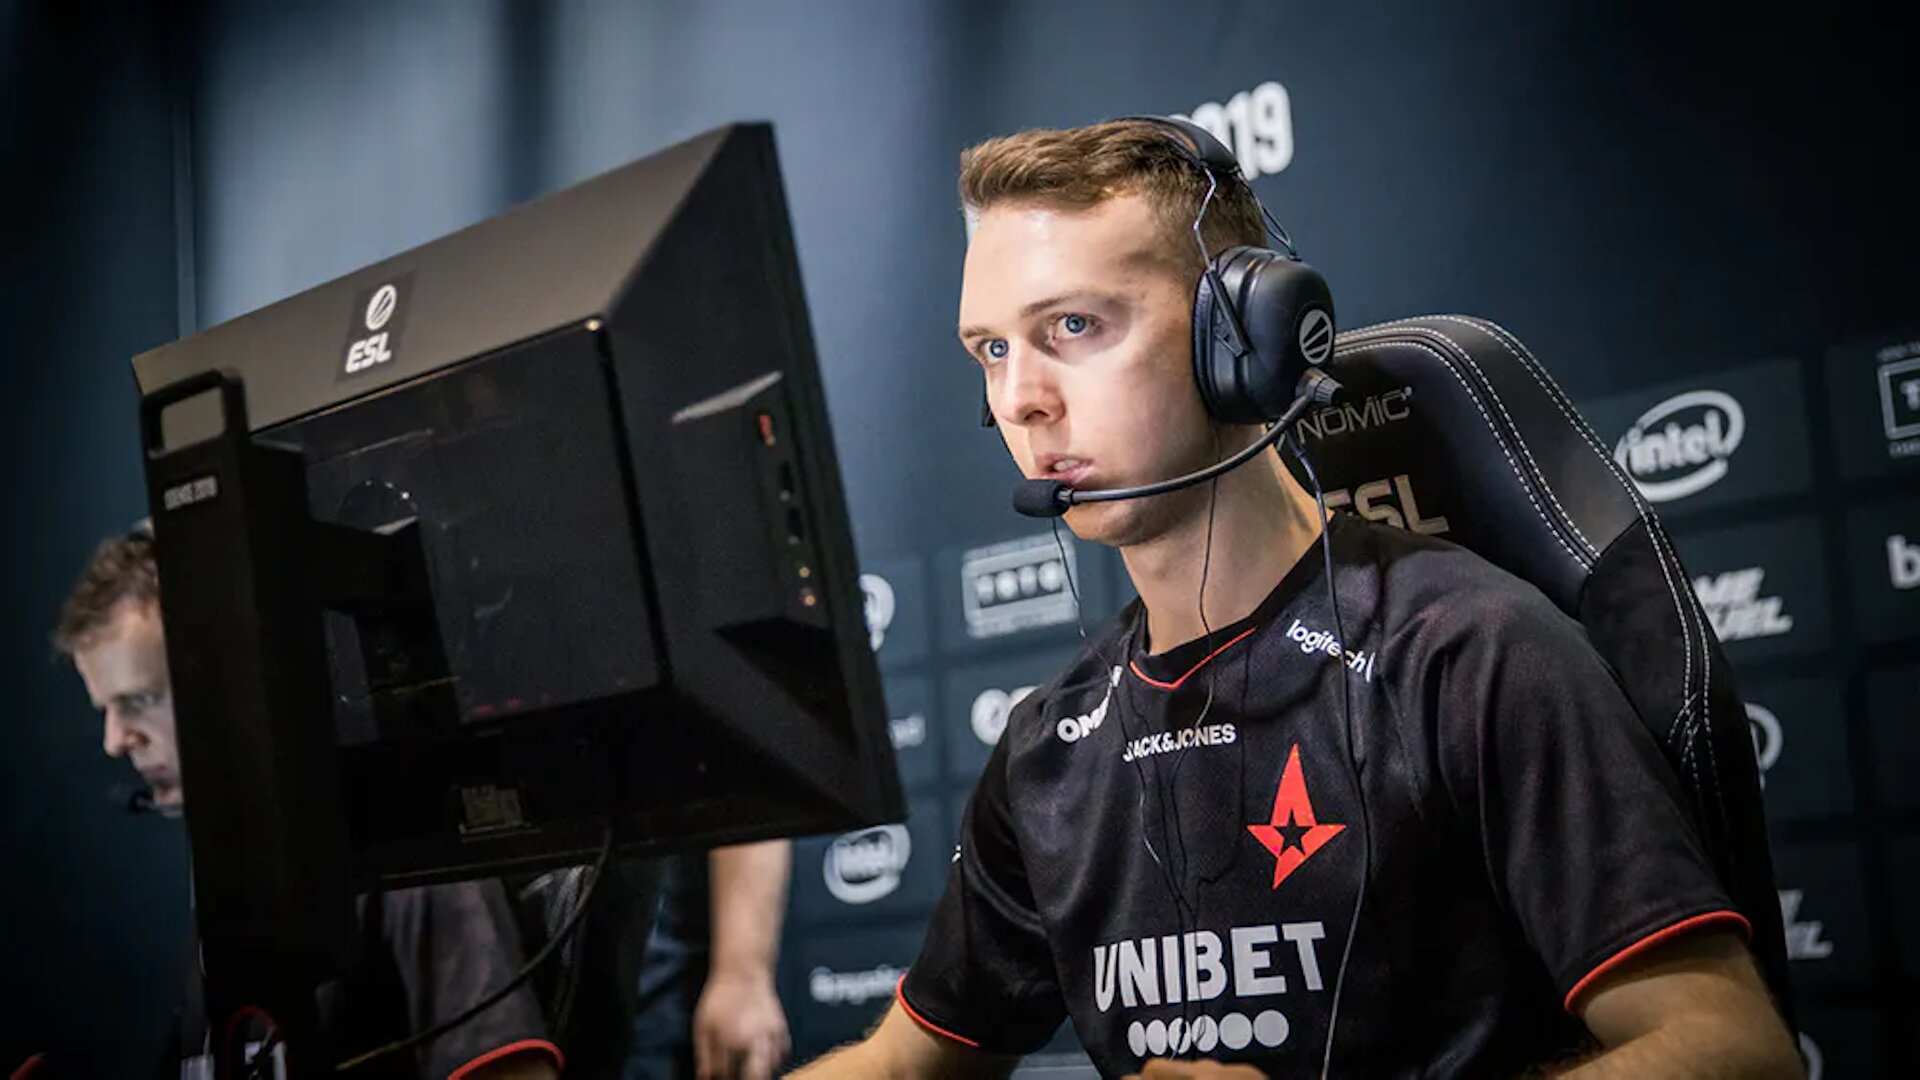 Gla1ve steps down from Astralis for three months due to burnout. JUGi to stand in his place on Astralis (Photo via ESL)